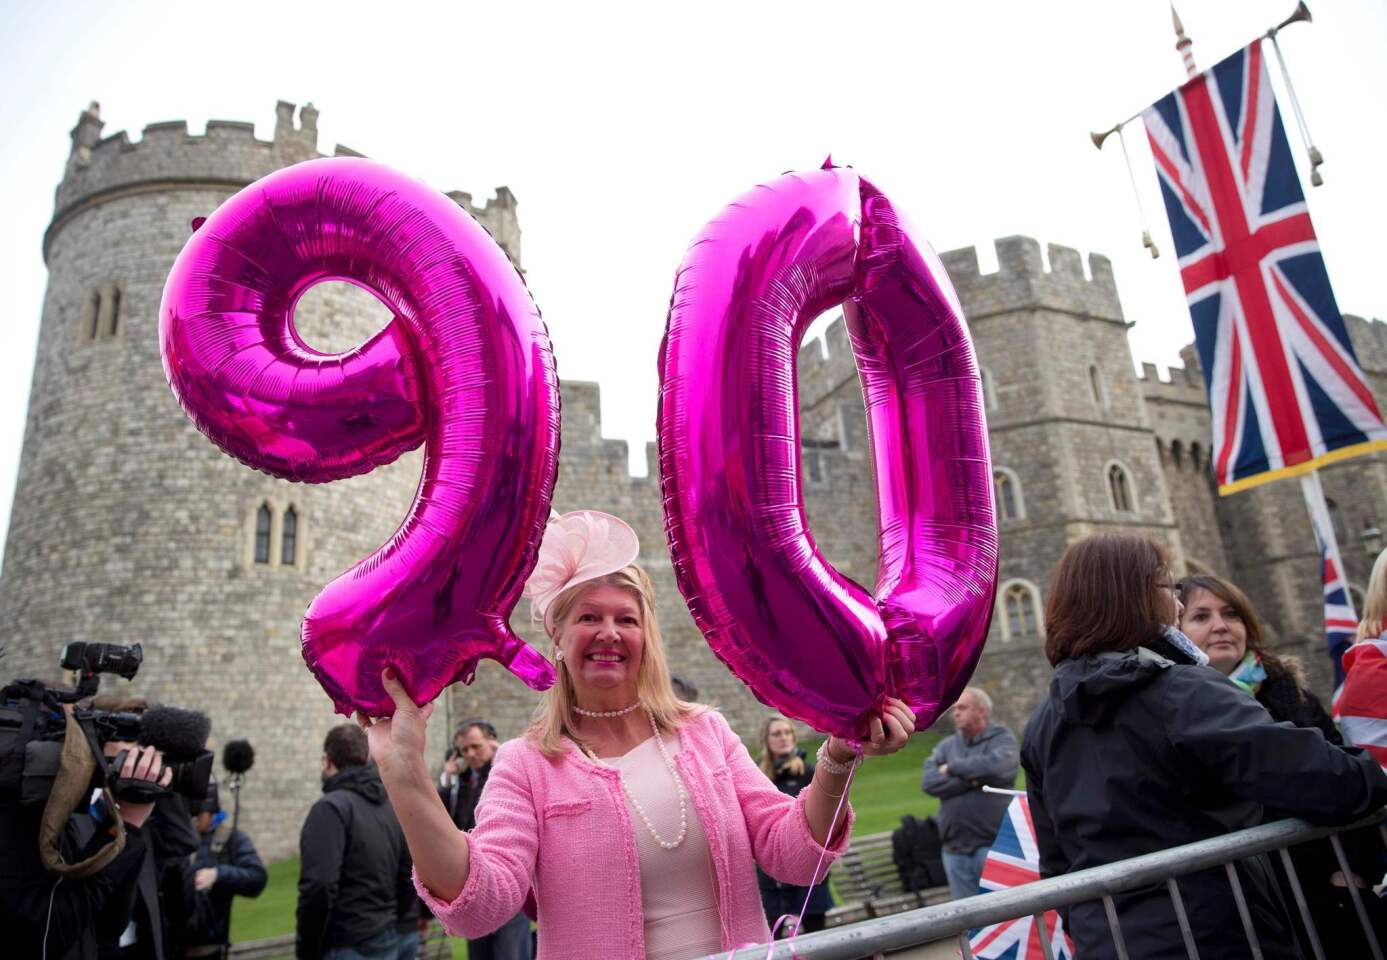 A royal supporter poses outside Windsor Castle as Britain's Queen Elizabeth II celebrates her 90th birthday on April 21.